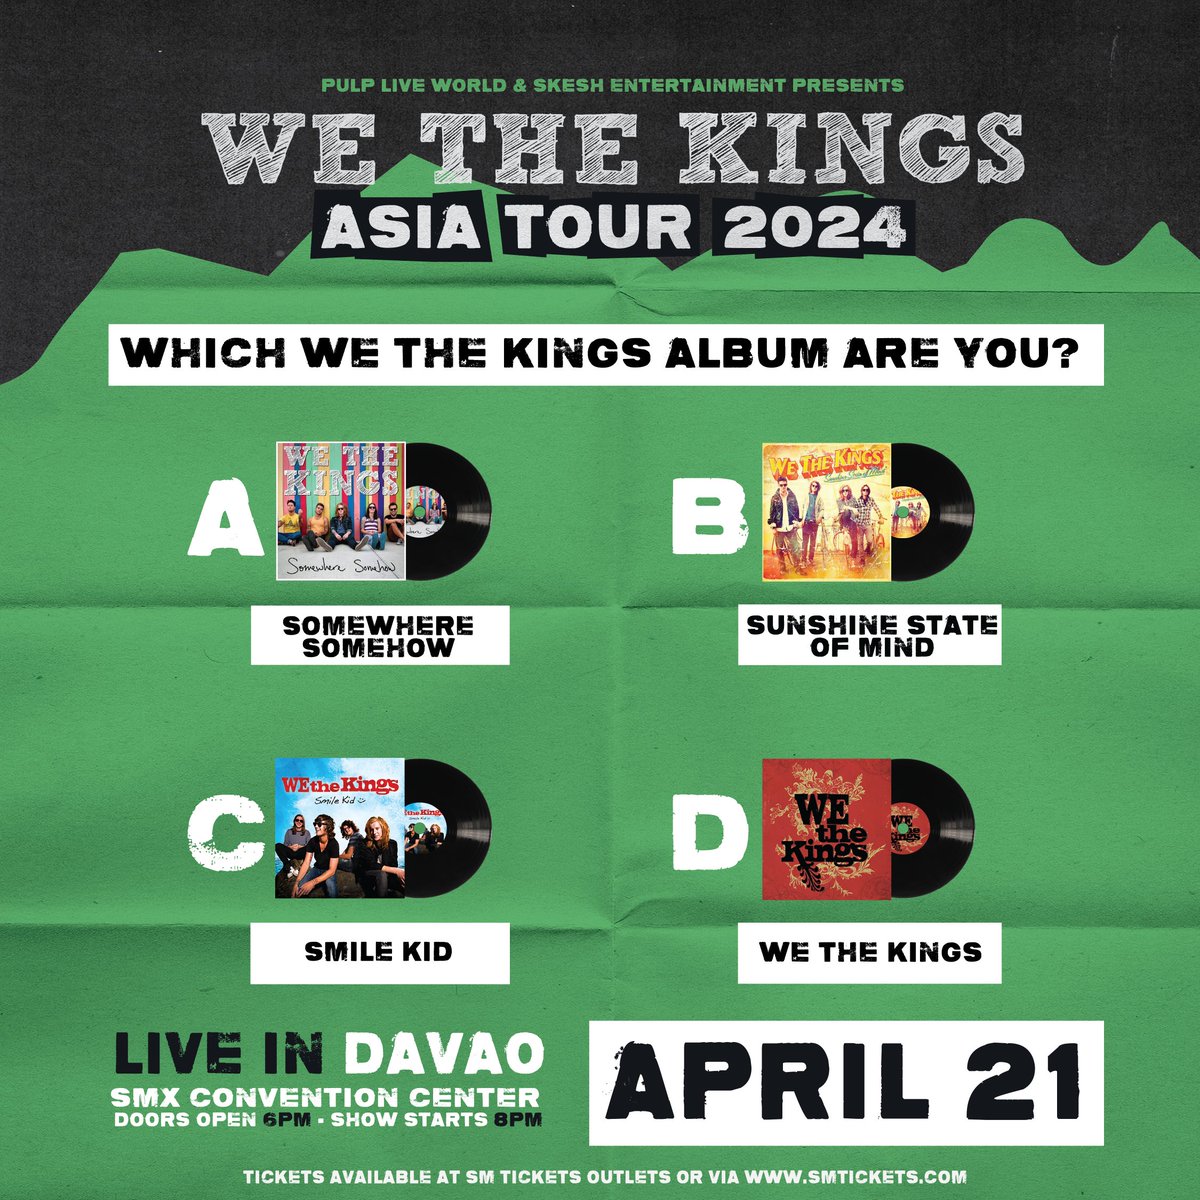 Which @WeTheKings album tells “The Story of Your Life”? Share your answers with us! 🙌🏼 On April 21, the band will treat you to live renditions of the songs that served as the soundtrack of your life’s journey. Catch the WE THE KINGS ASIA TOUR 2024 at the SMX Convention Center…